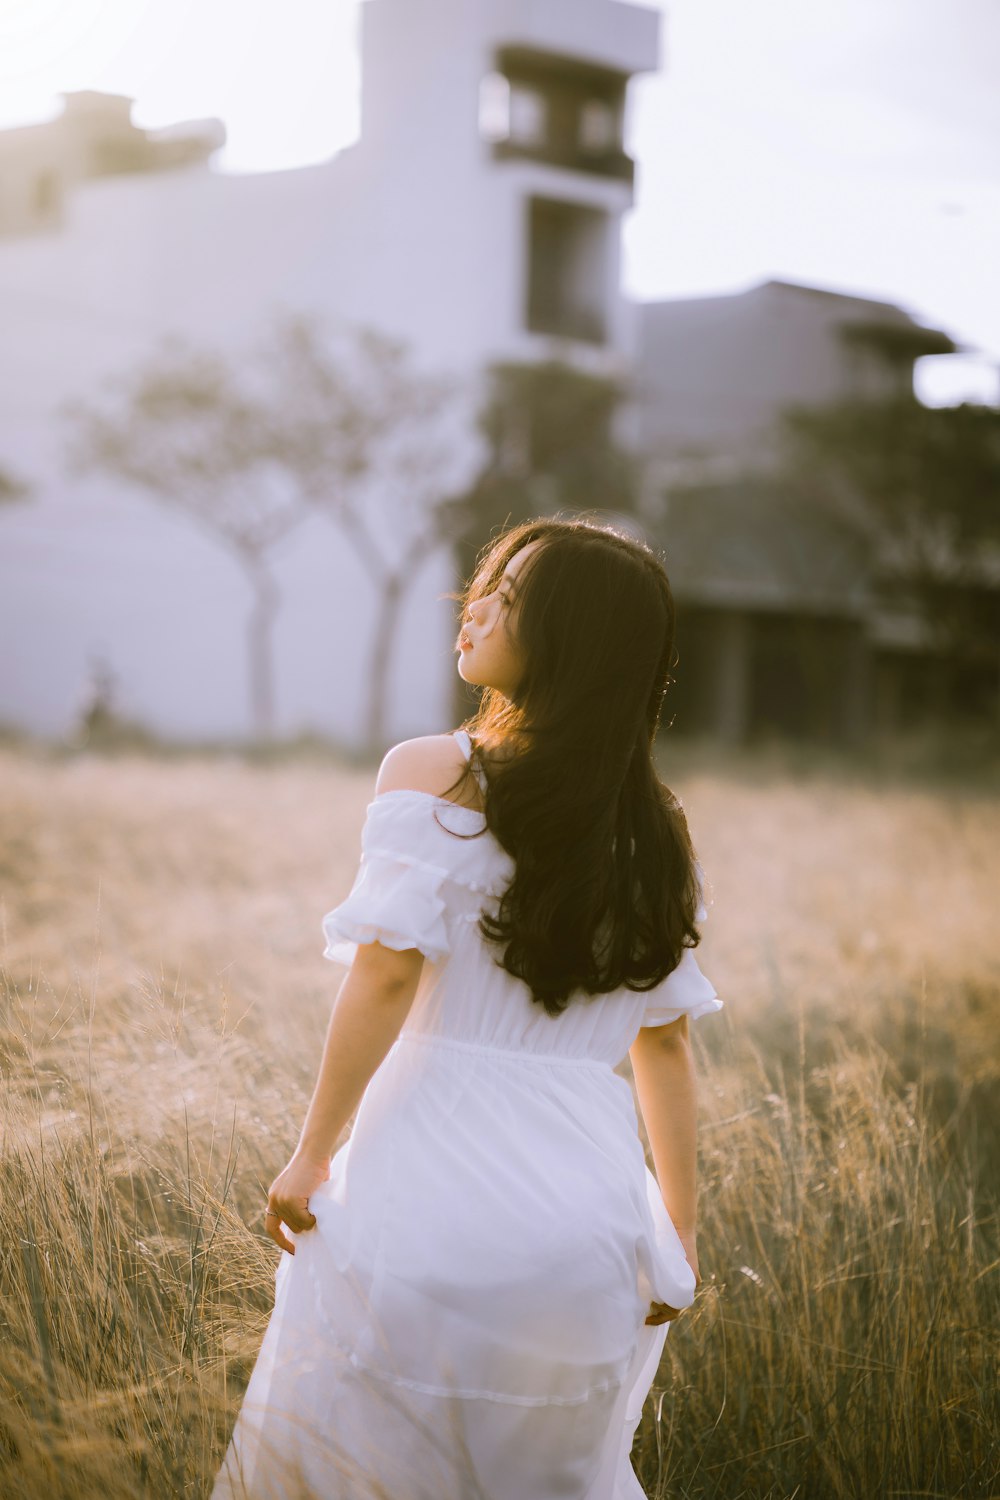 woman in white dress standing on grass field during daytime